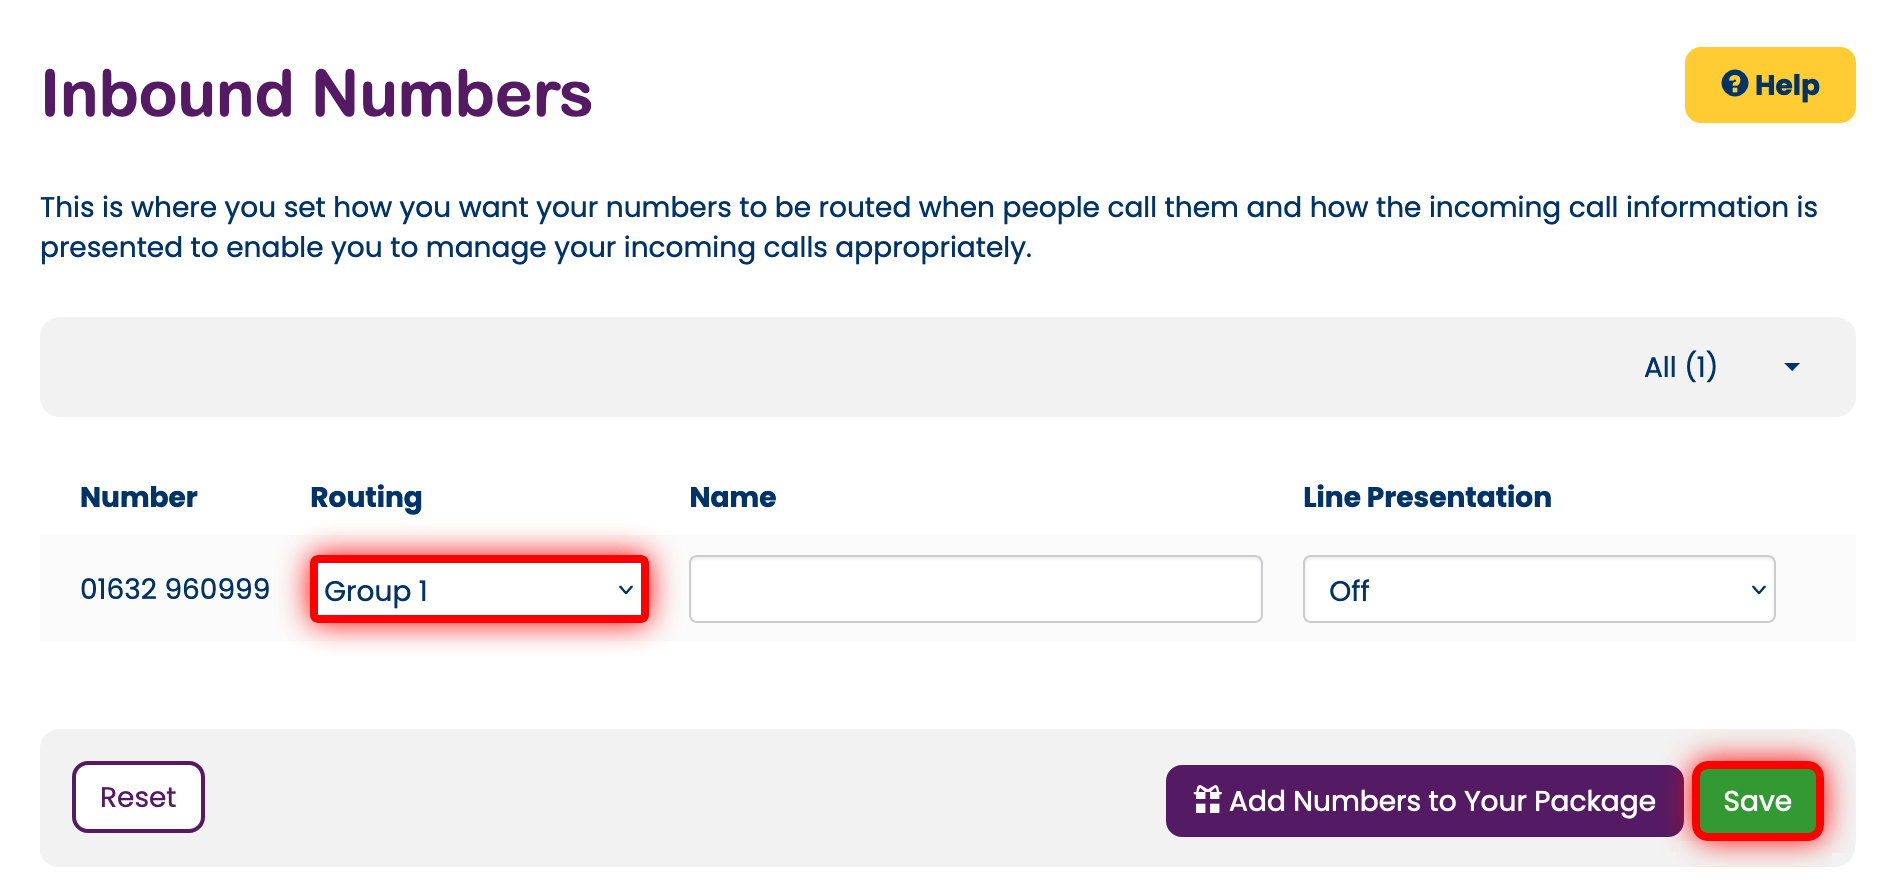 Routing inbound numbers to call groups